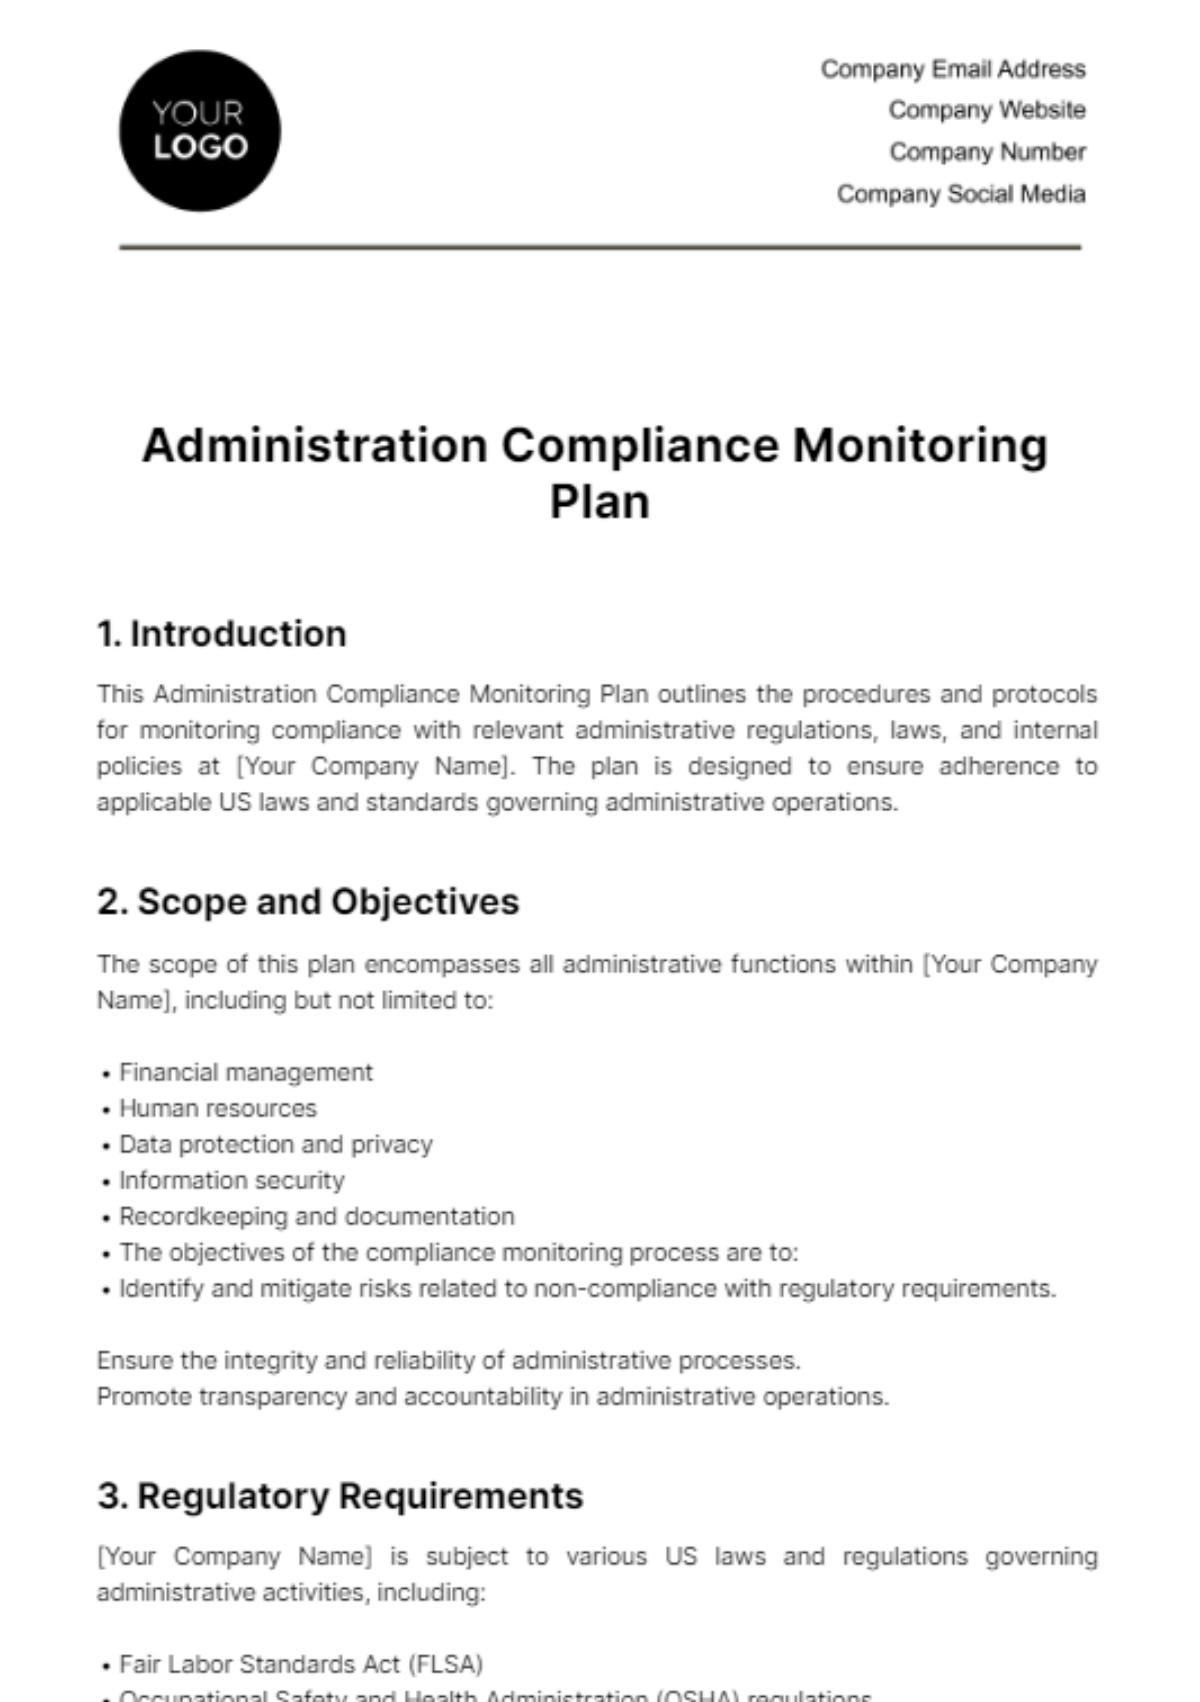 Free Administration Compliance Monitoring Plan Template